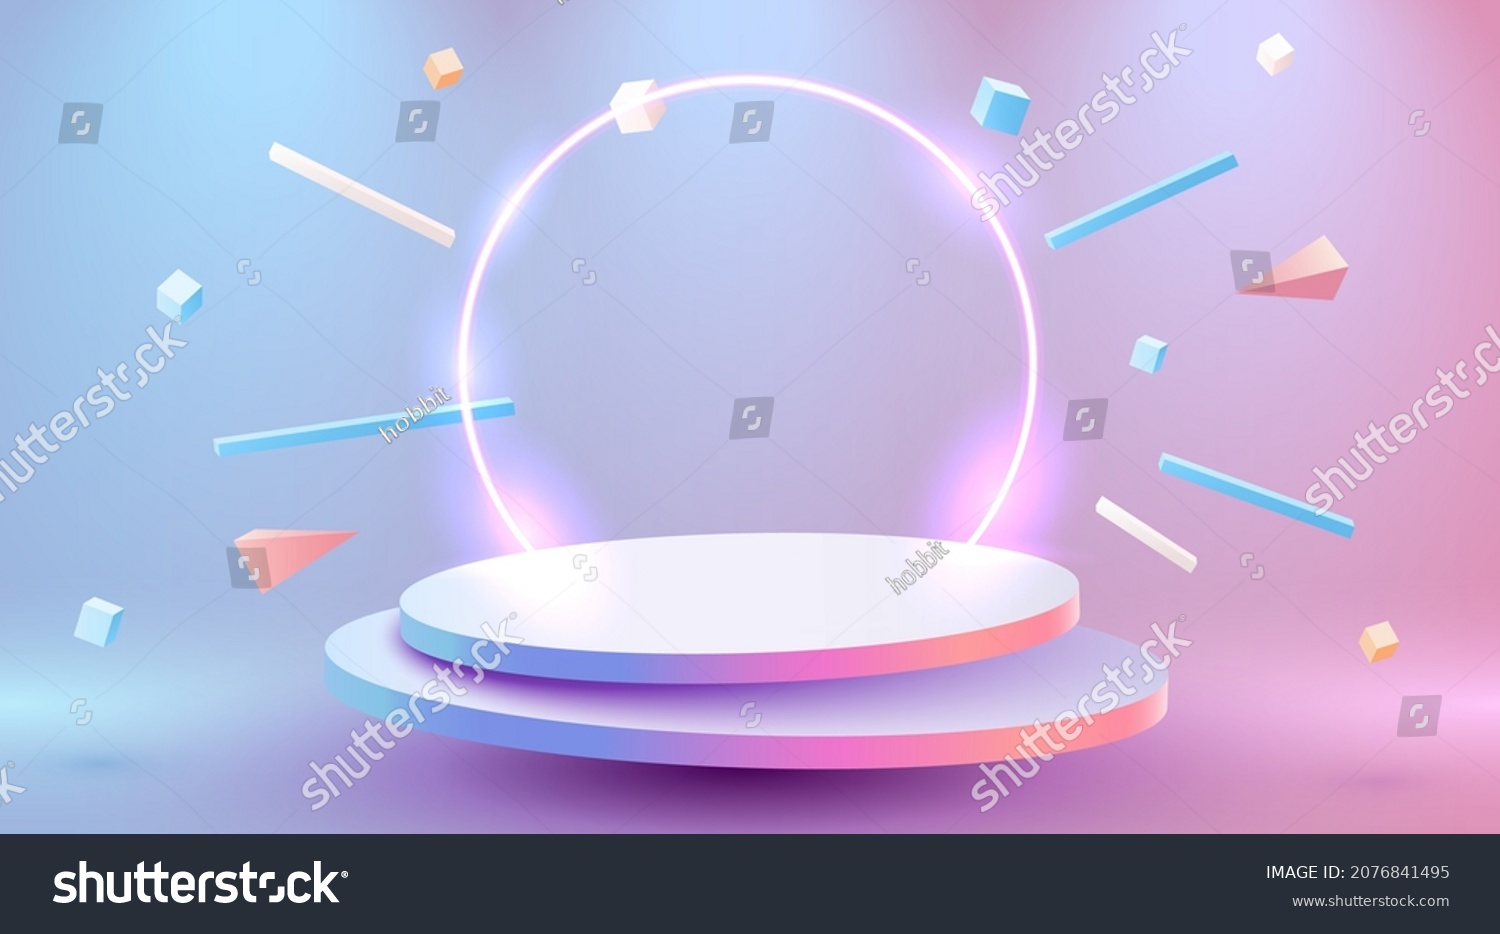 Abstract scene background. Product presentation, mock up, show cosmetic product, Podium, stage pedestal or platform. Vector illustration #2076841495